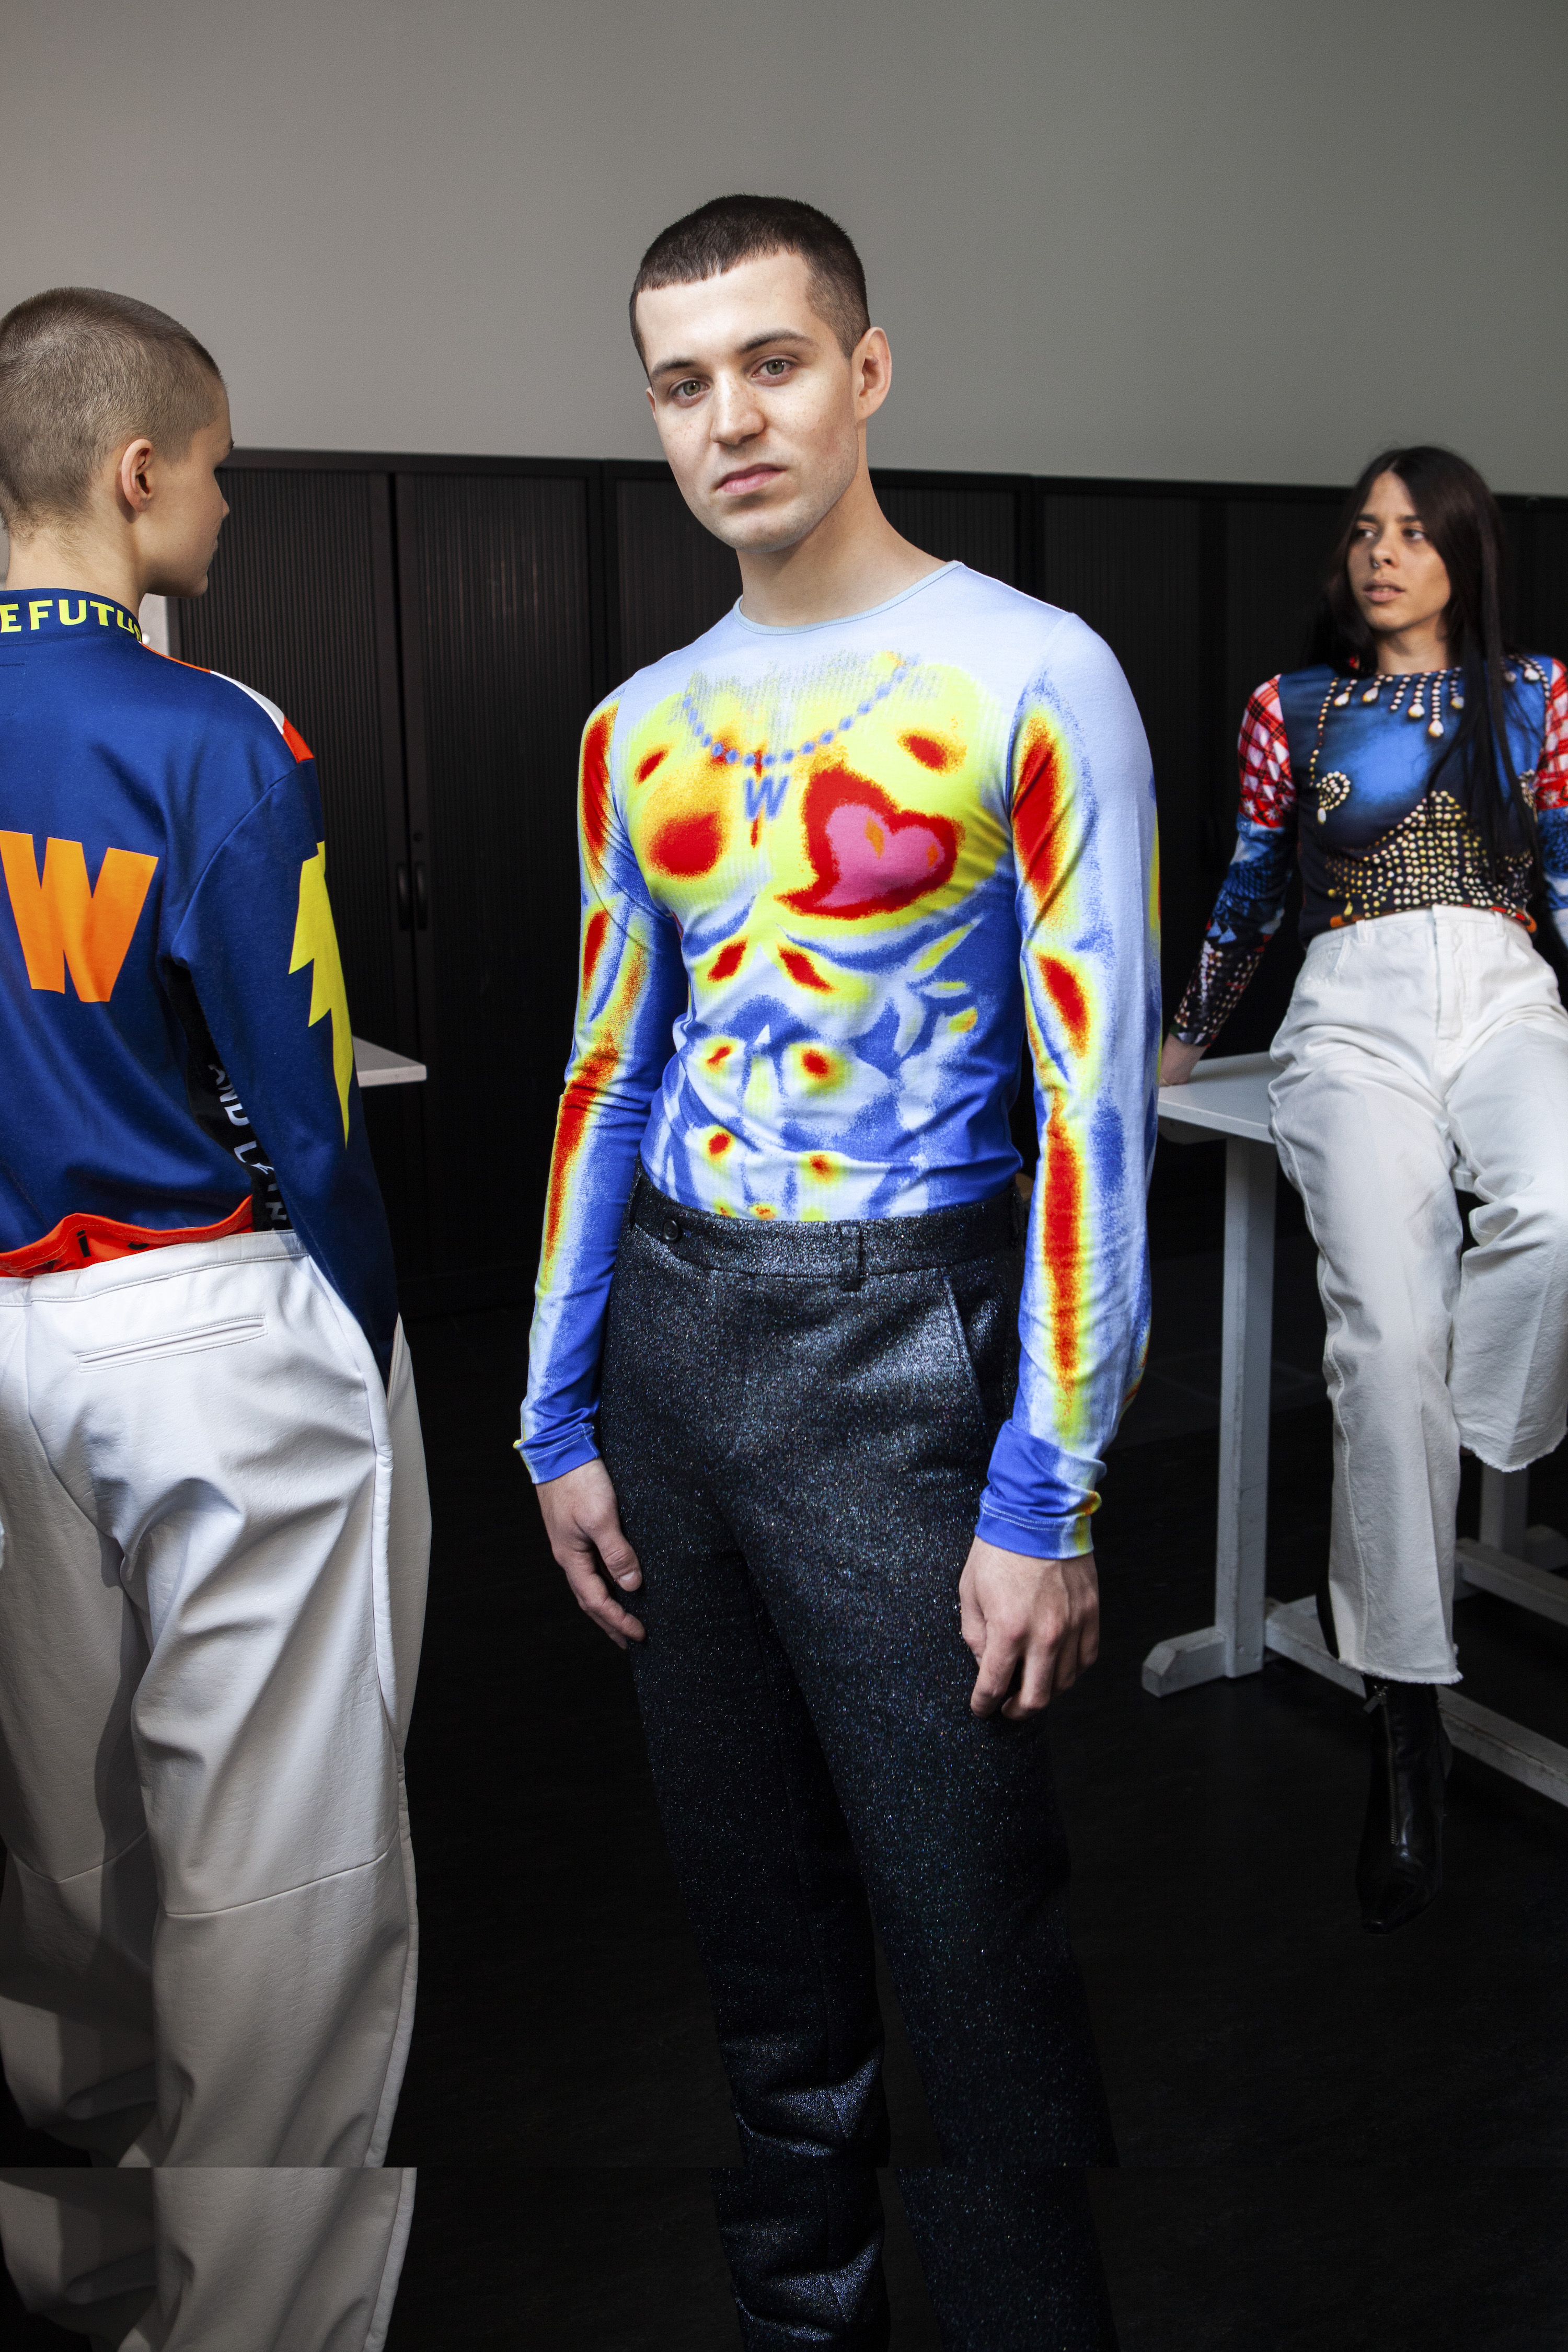 Walter Van Beirendonck on His Radical Label: “I Really Go to the Flesh”